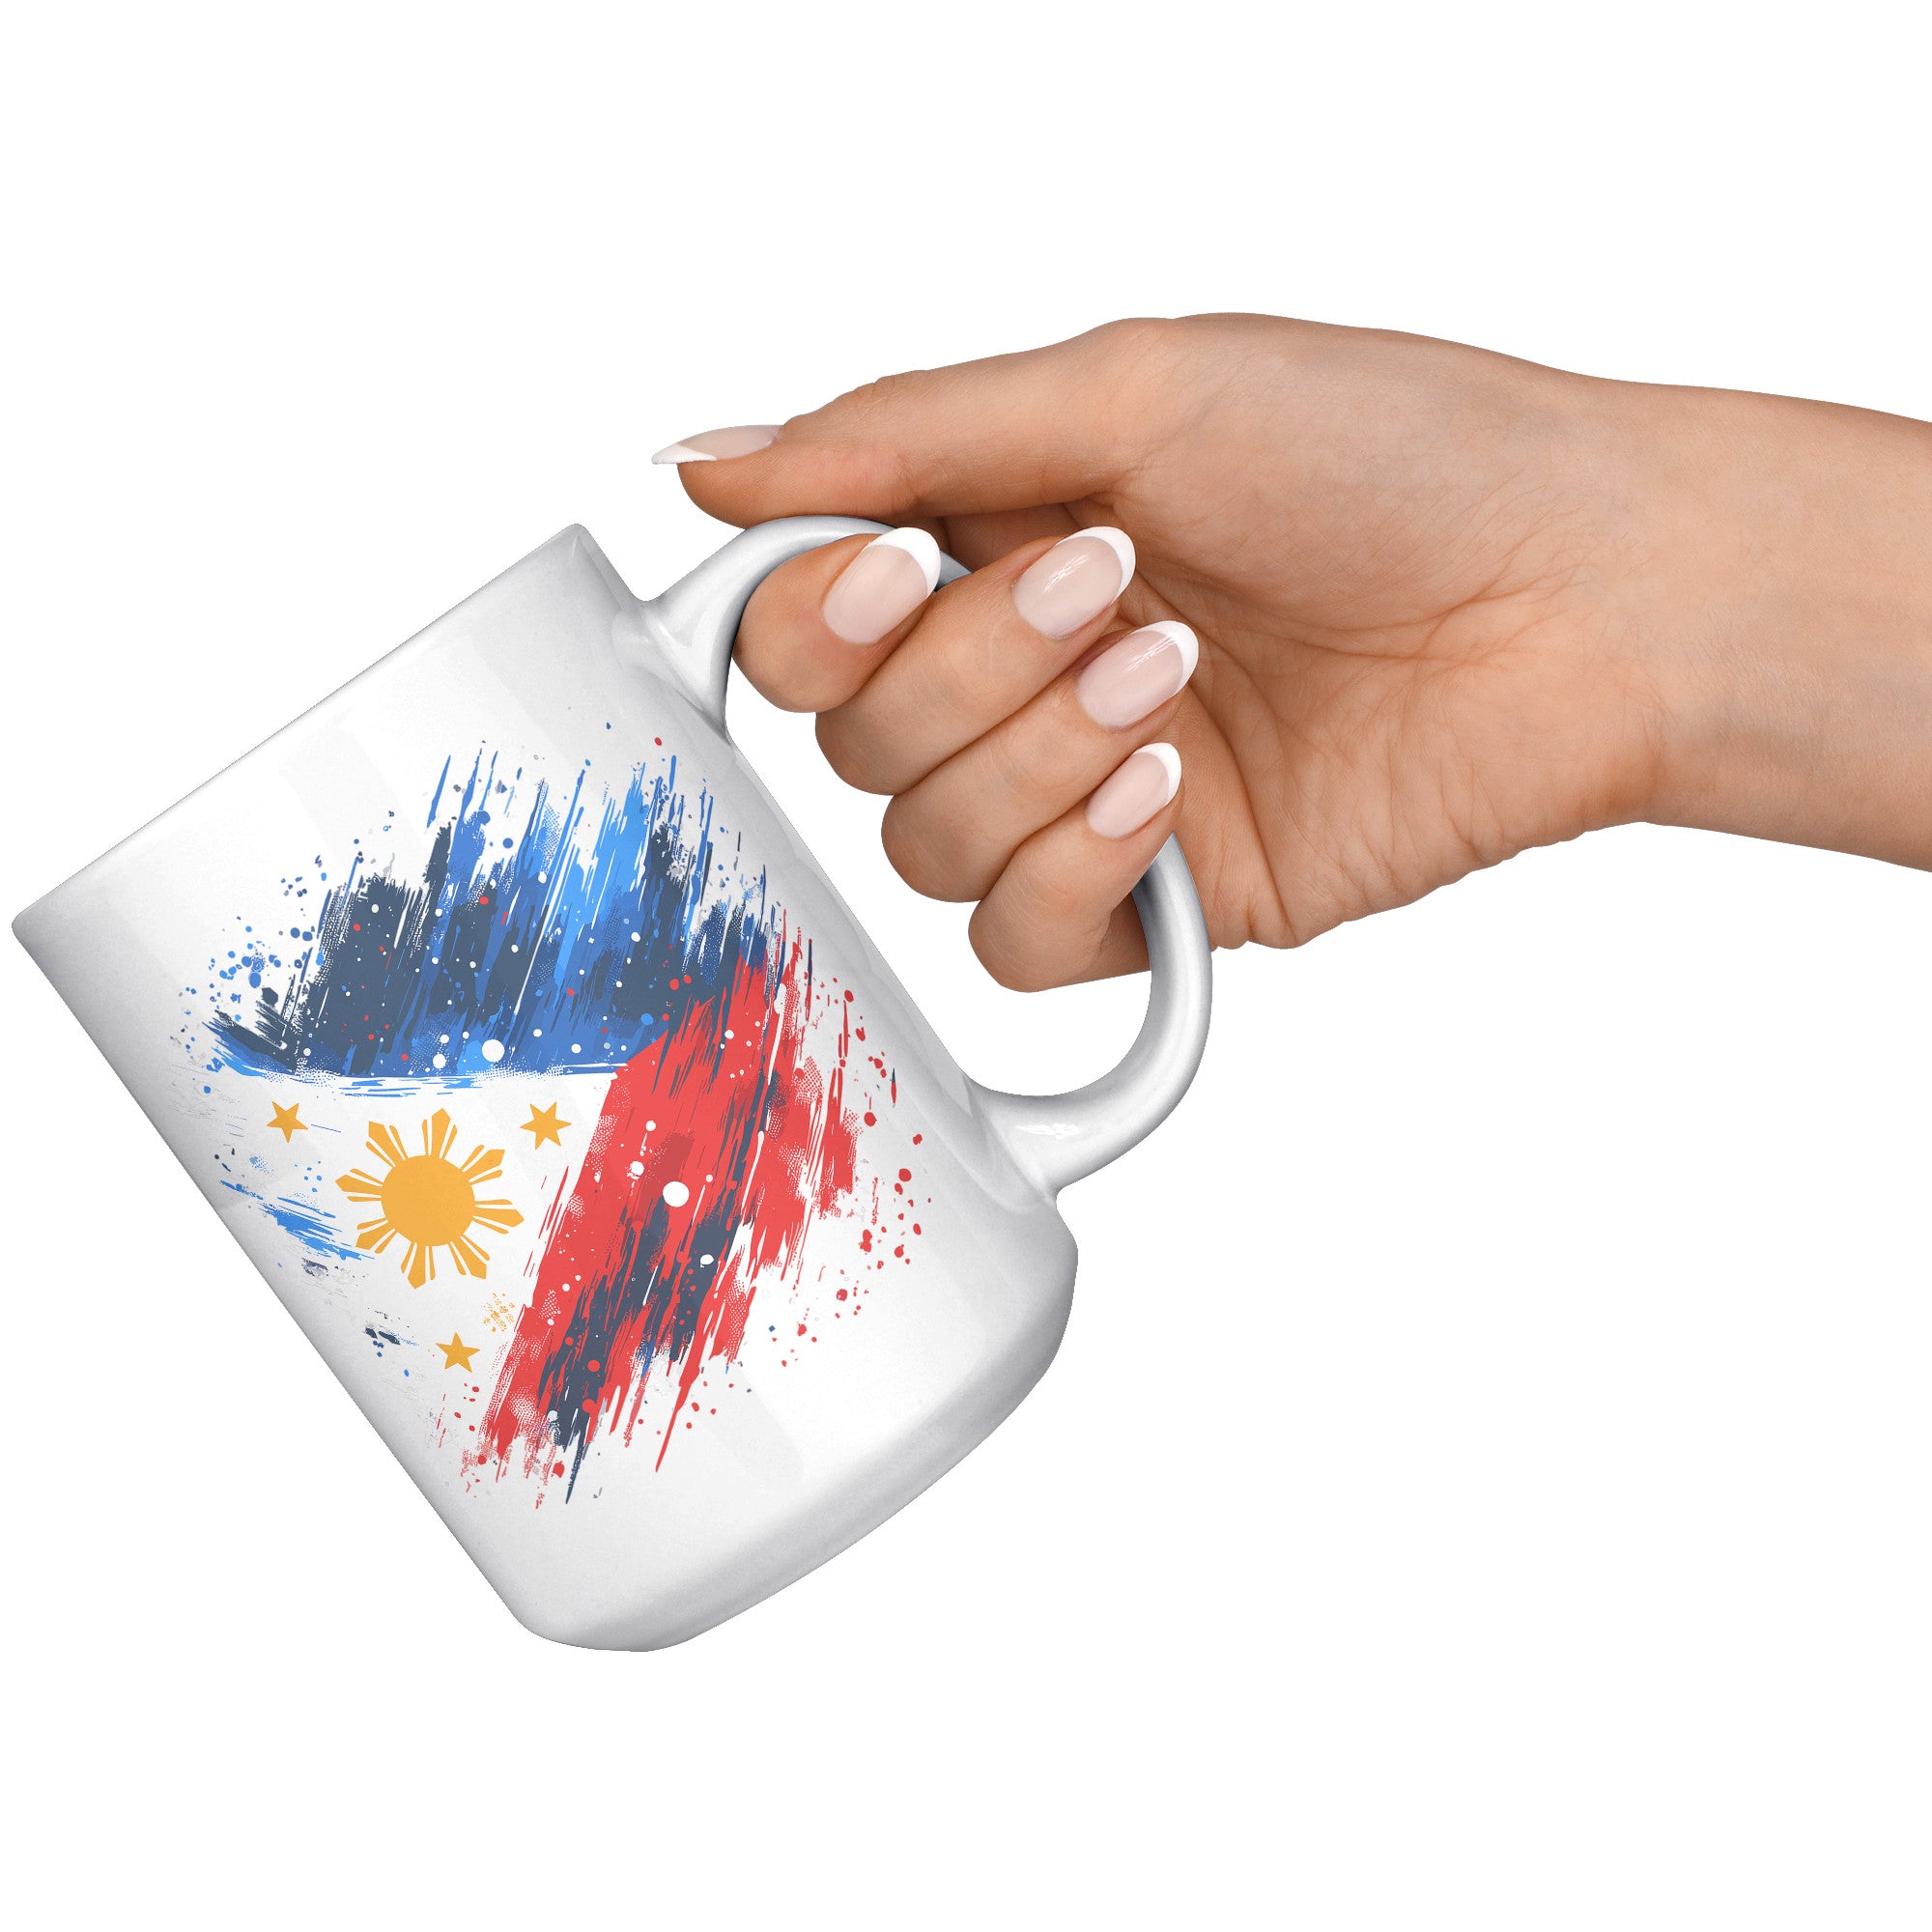 Proudly Pinoy Coffee Mug - Vibrant Filipino Flag Design - Patriotic Gift for Filipinos - Celebrate Heritage with Every Sip!" - H1